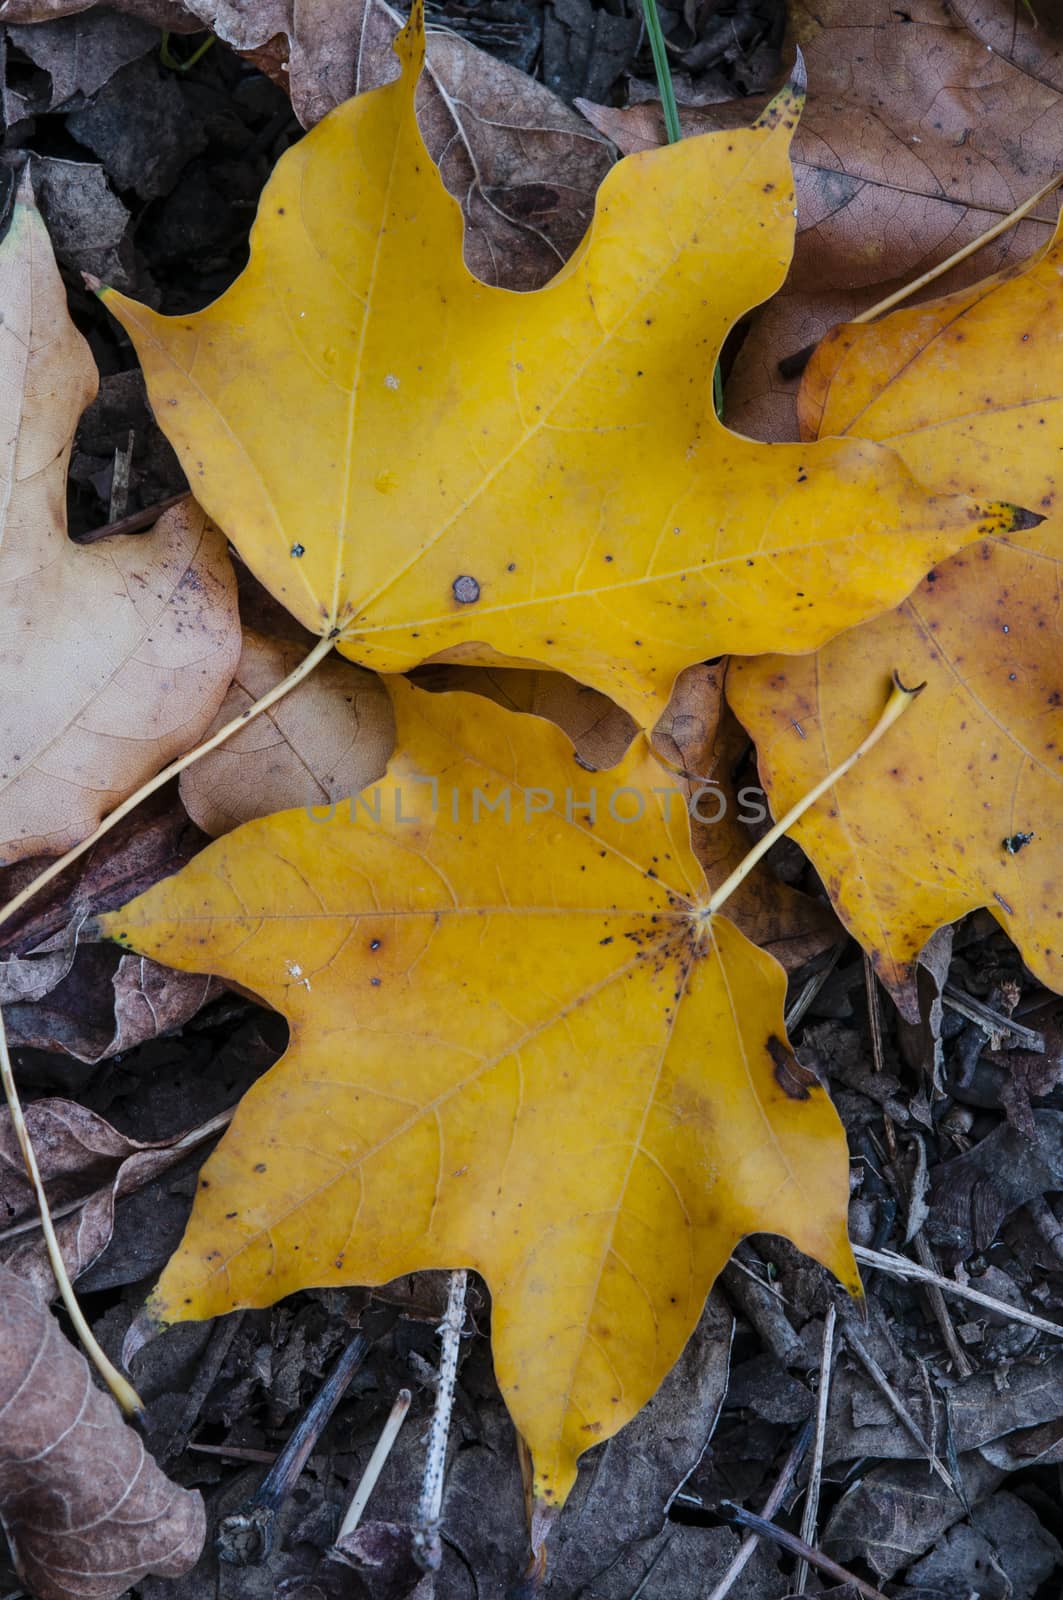 Details of nature in Autumn by AlessandroZocc